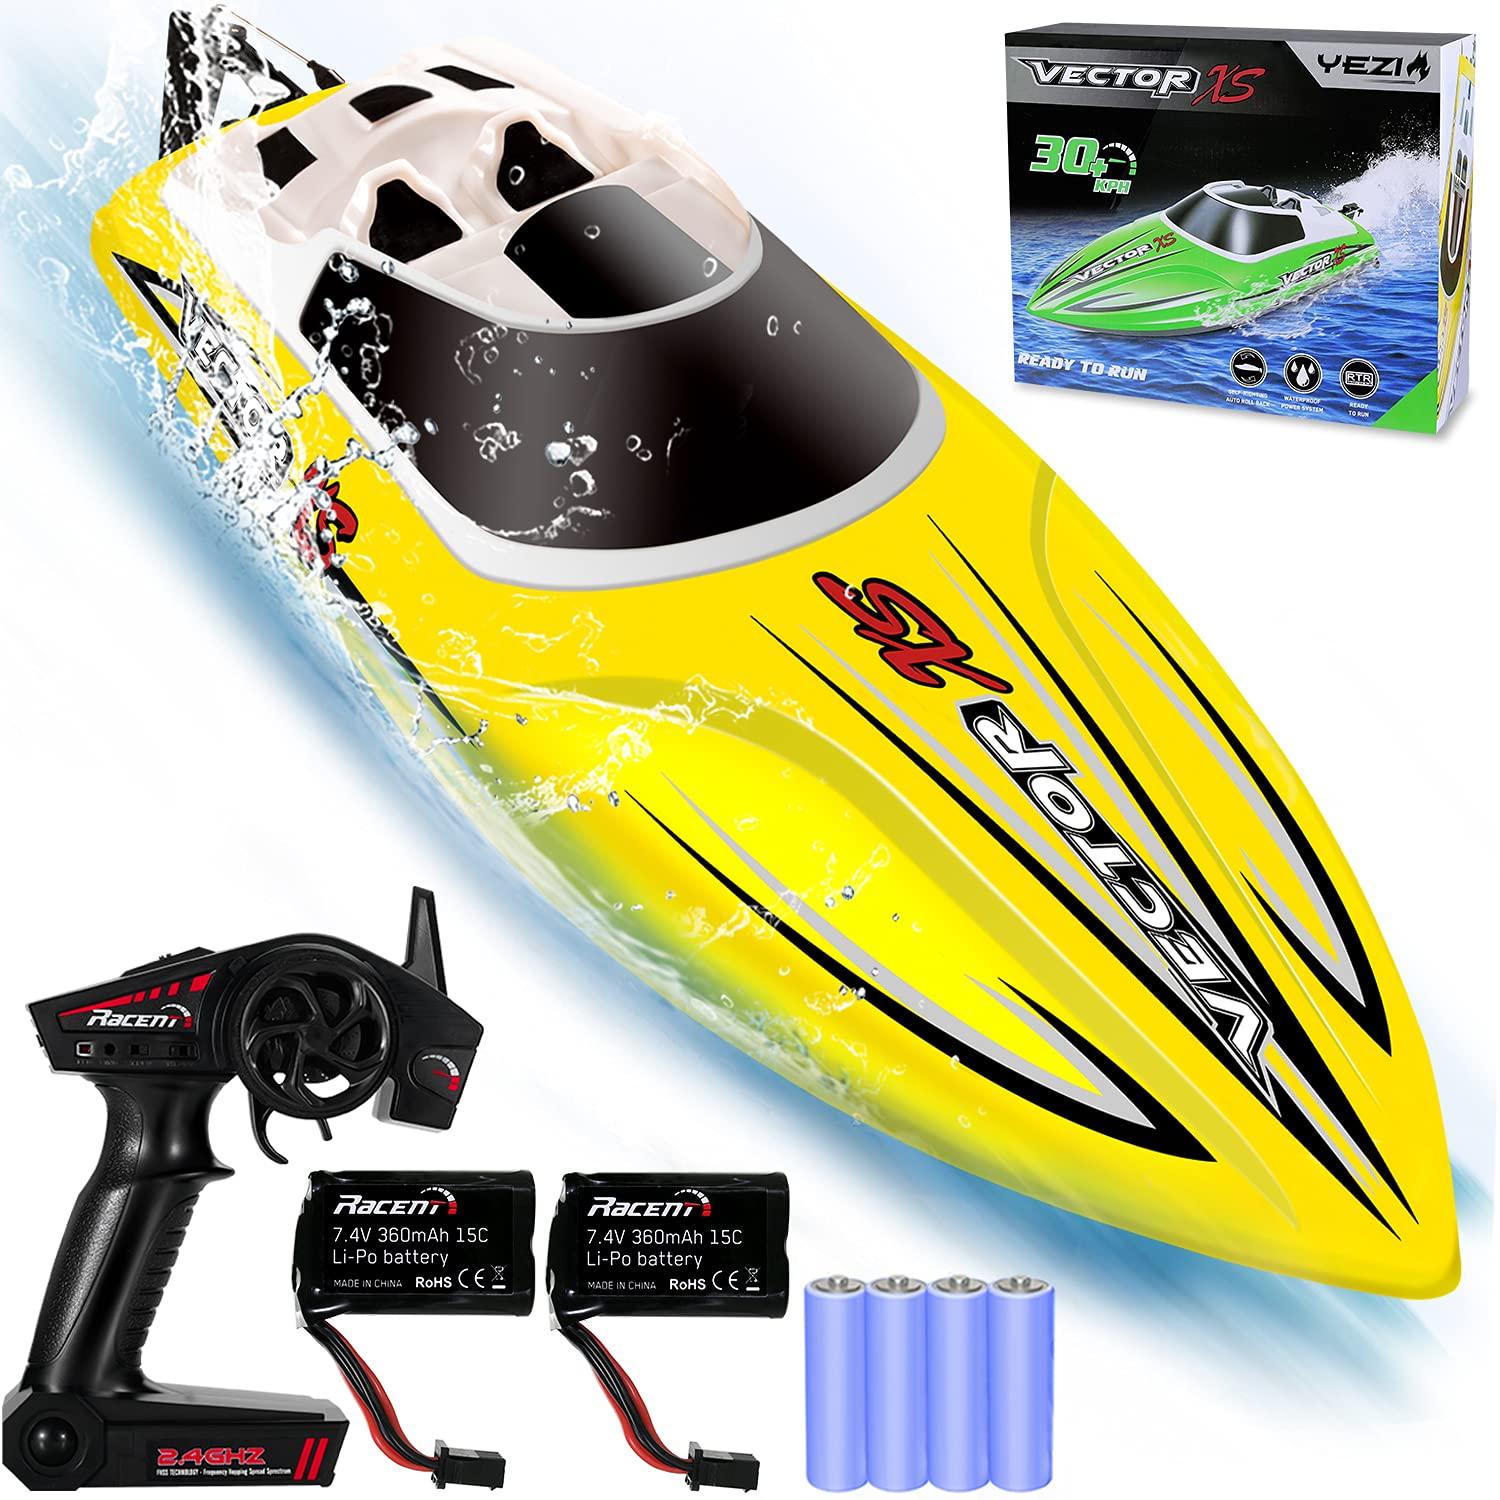 Remote Control Boat For Swimming Pool: Choosing the perfect remote control boat for your pool